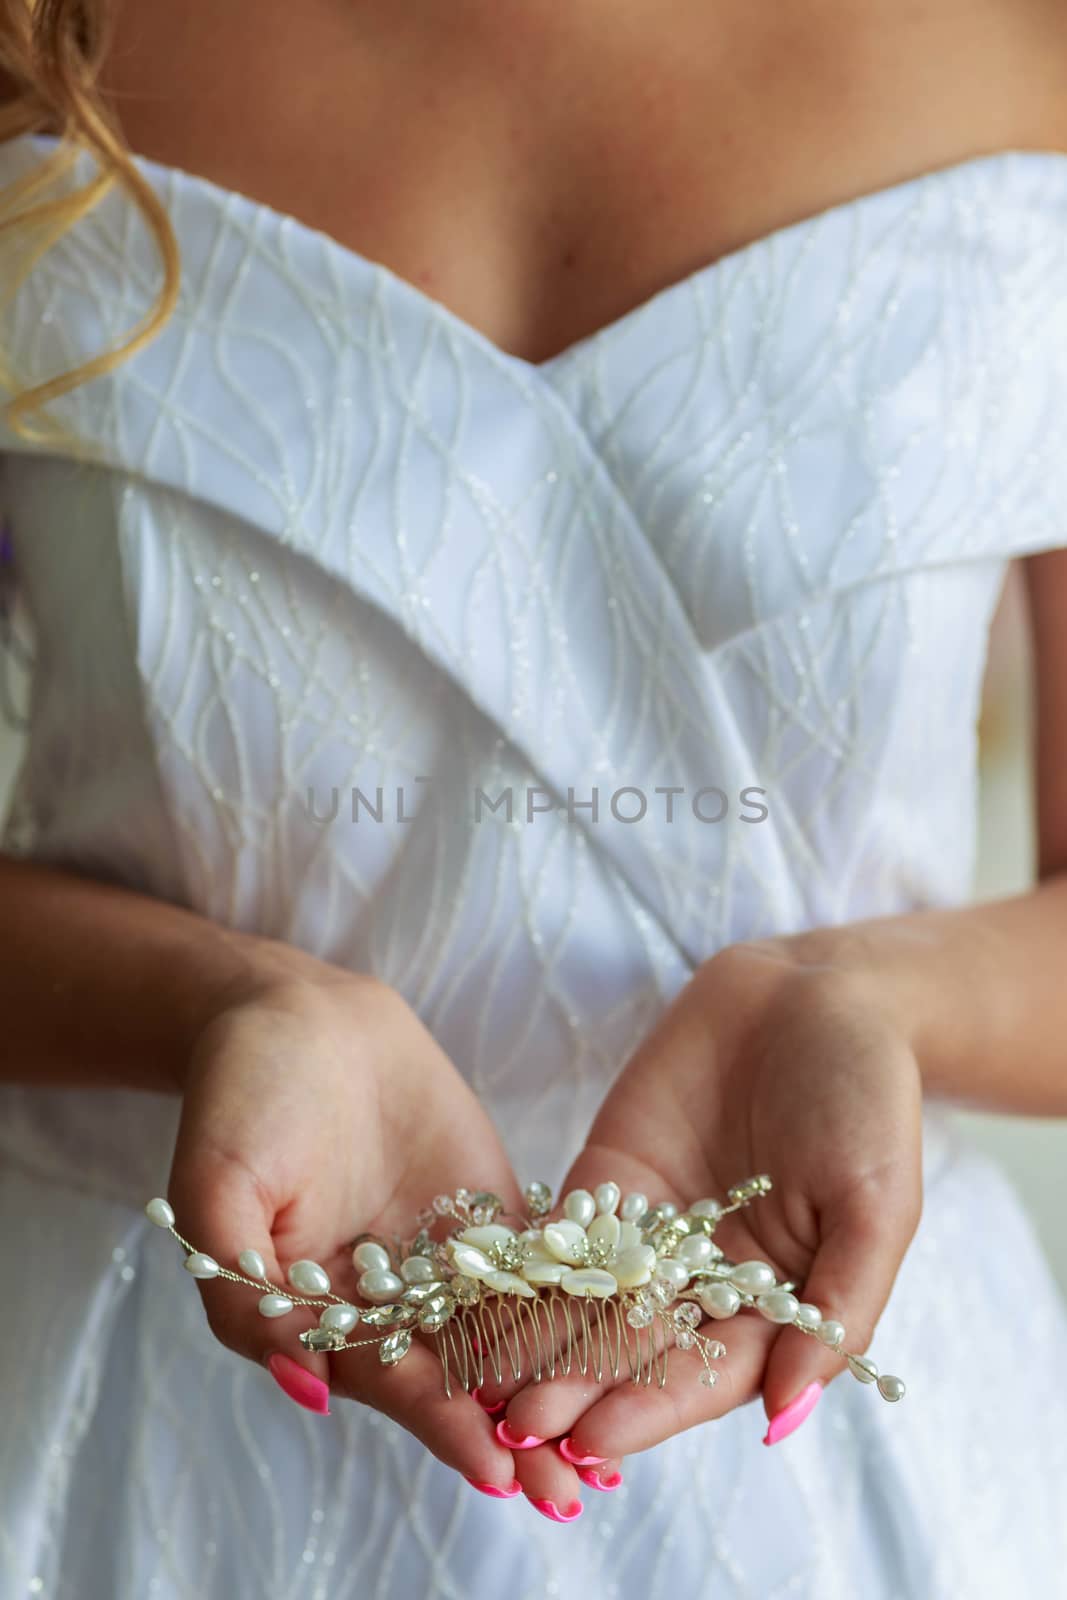 Close-up of bride's hands with hair ornament for wedding hairstyle.